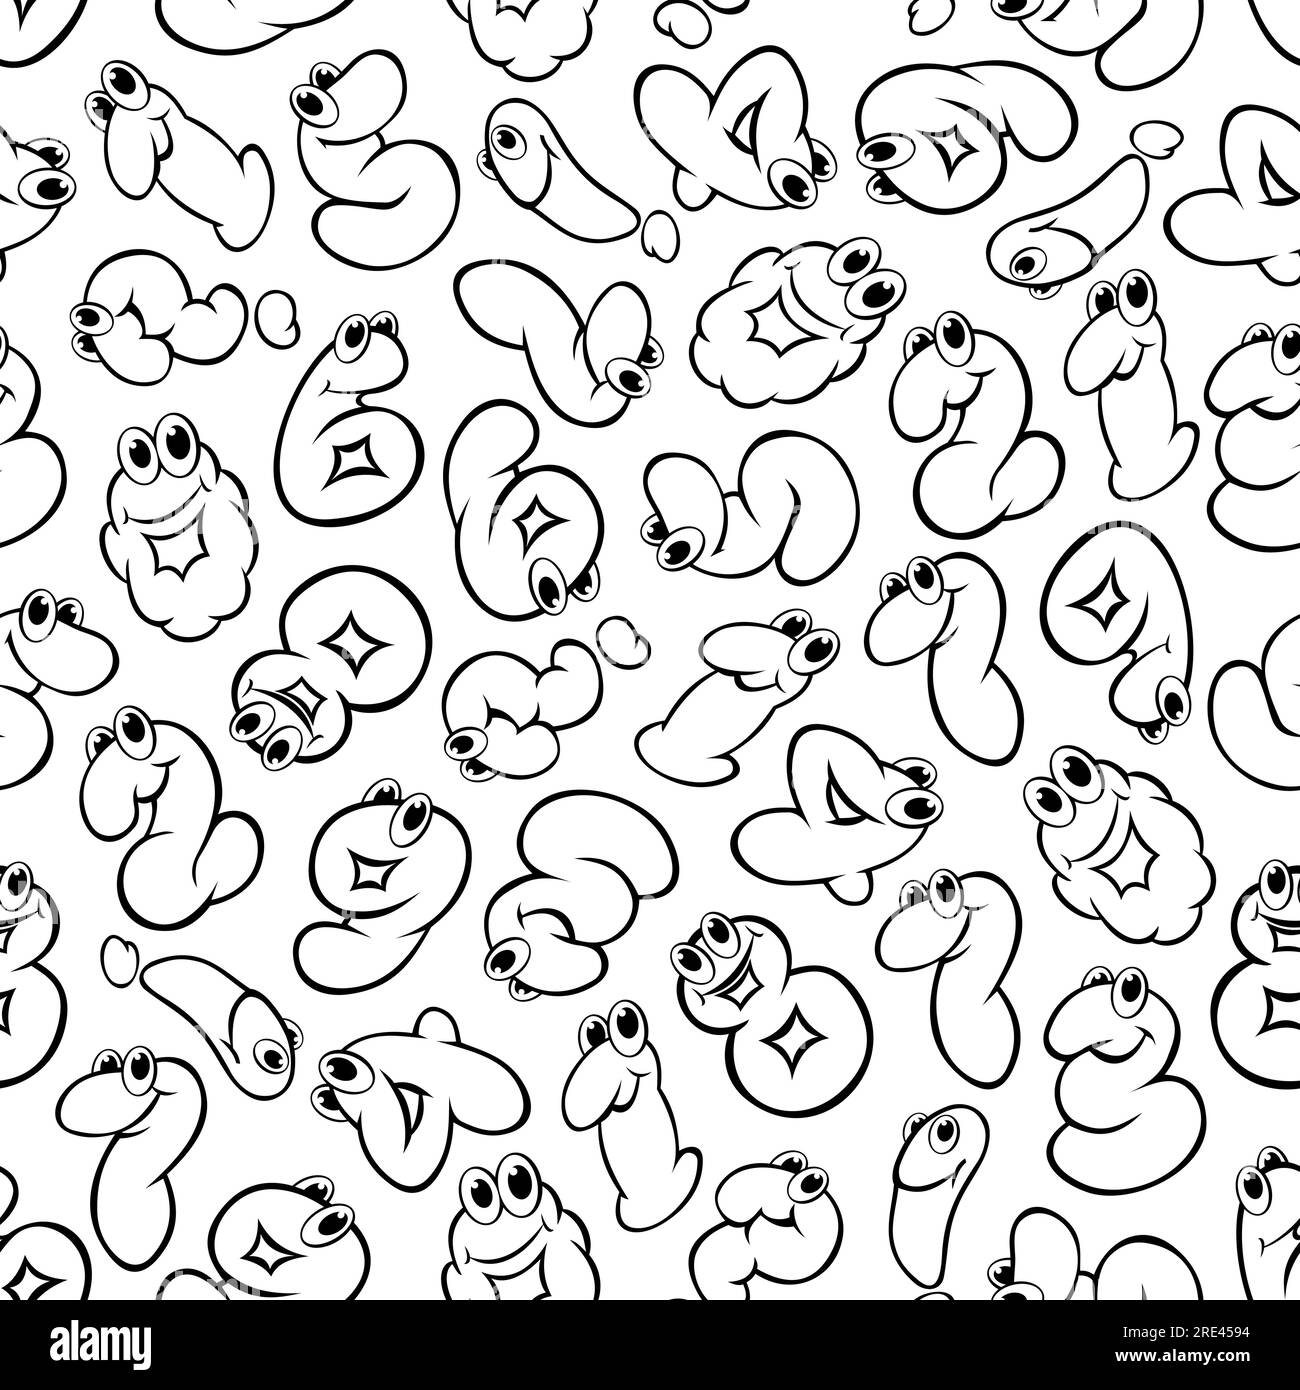 Black and white cartoon numbers characters background with sketchy seamless pattern of bubble digits, question and exclamation marks with smiling faces. May be use as childish room interior or book flyleaf design Stock Vector